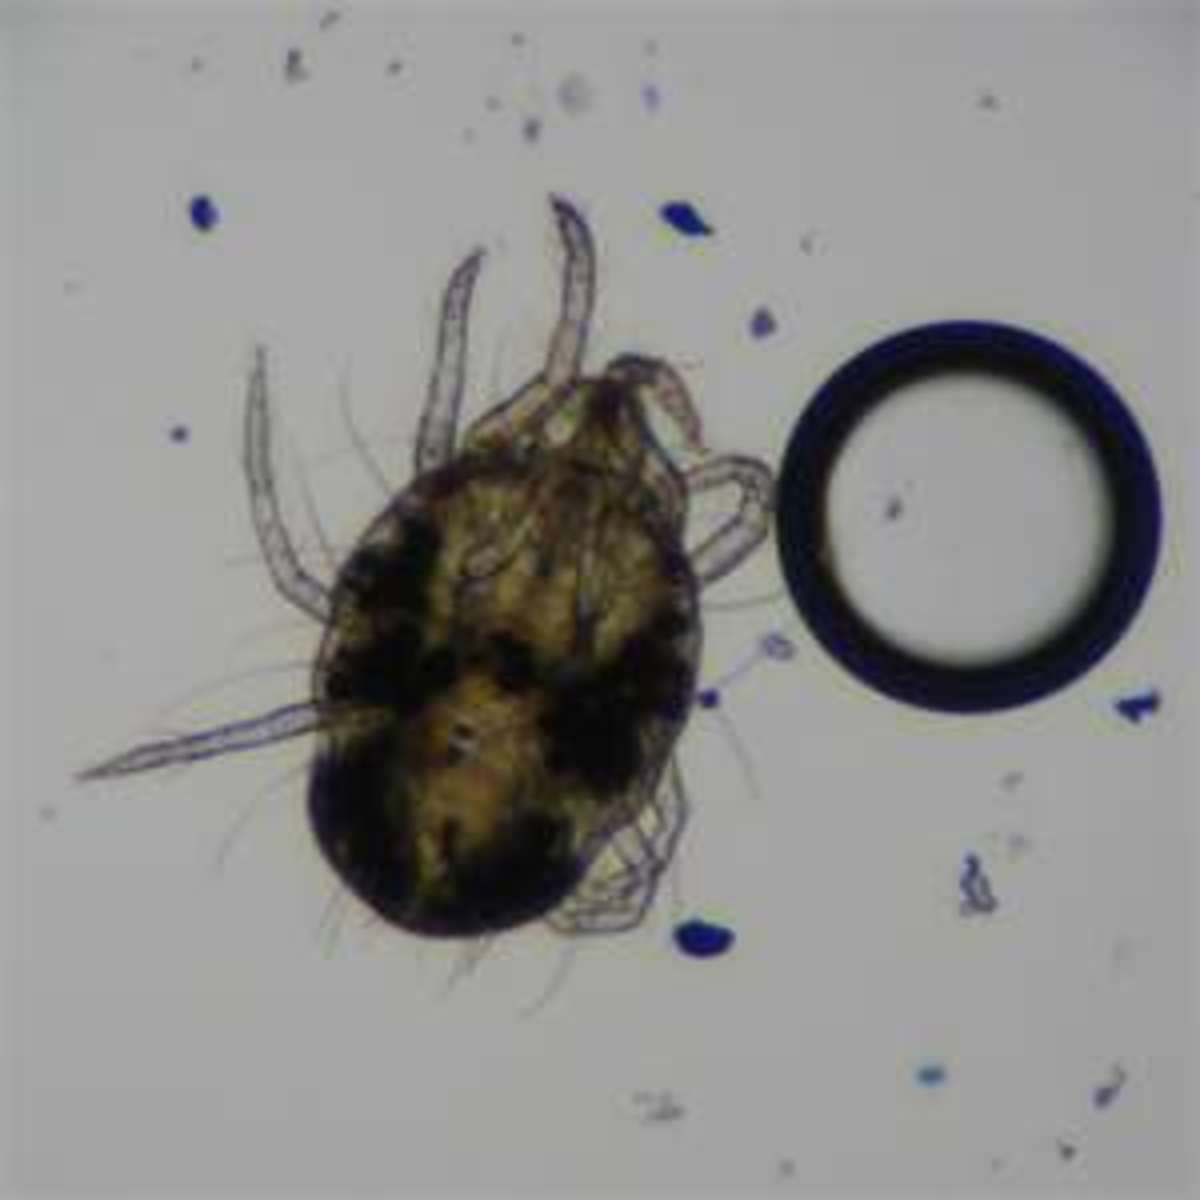 Dustmites can be found all over our homes, They are very small and hide in our bedding, carpets, sofas, etc.